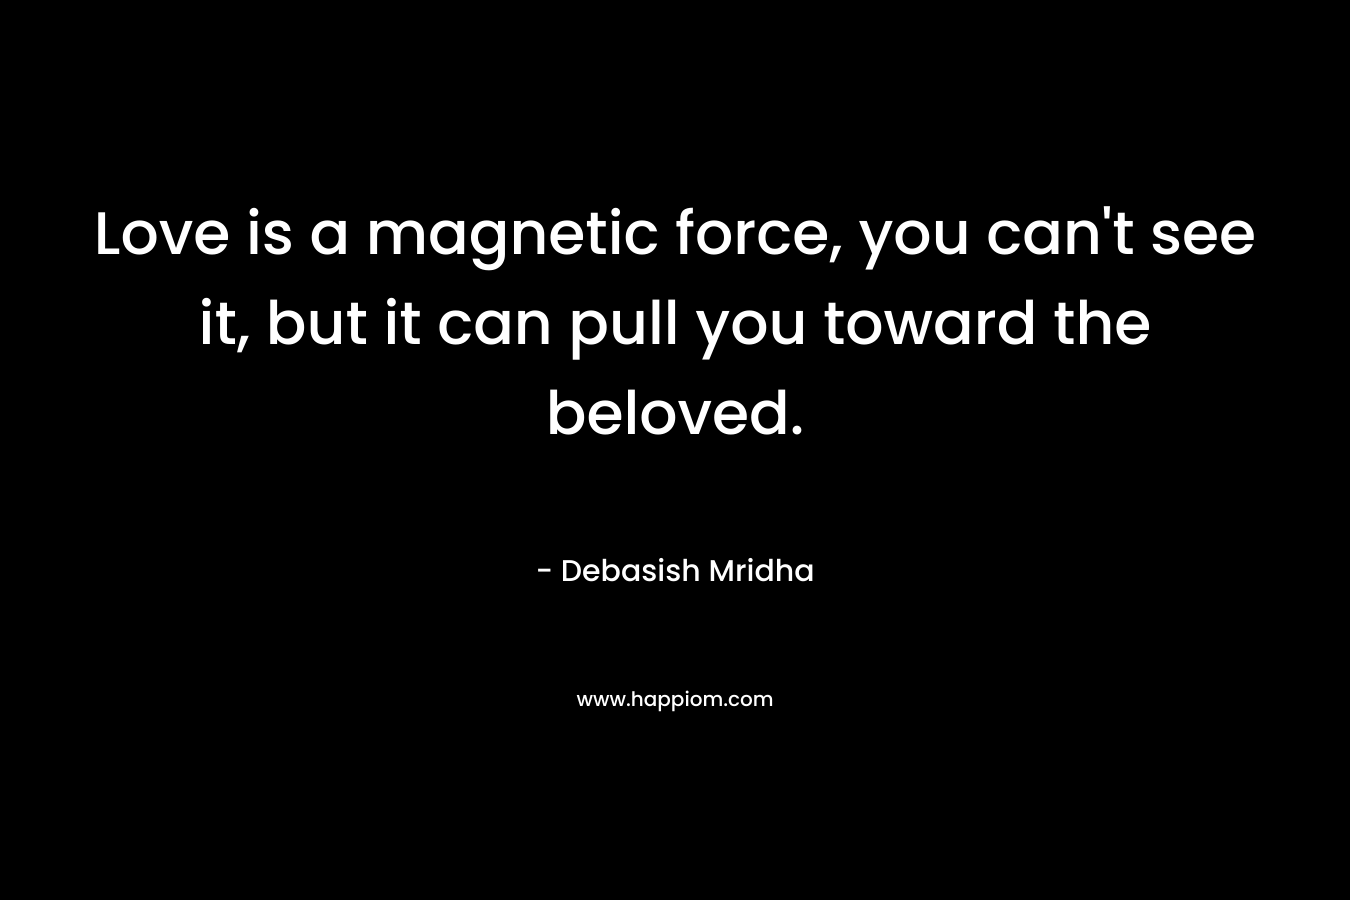 Love is a magnetic force, you can't see it, but it can pull you toward the beloved.